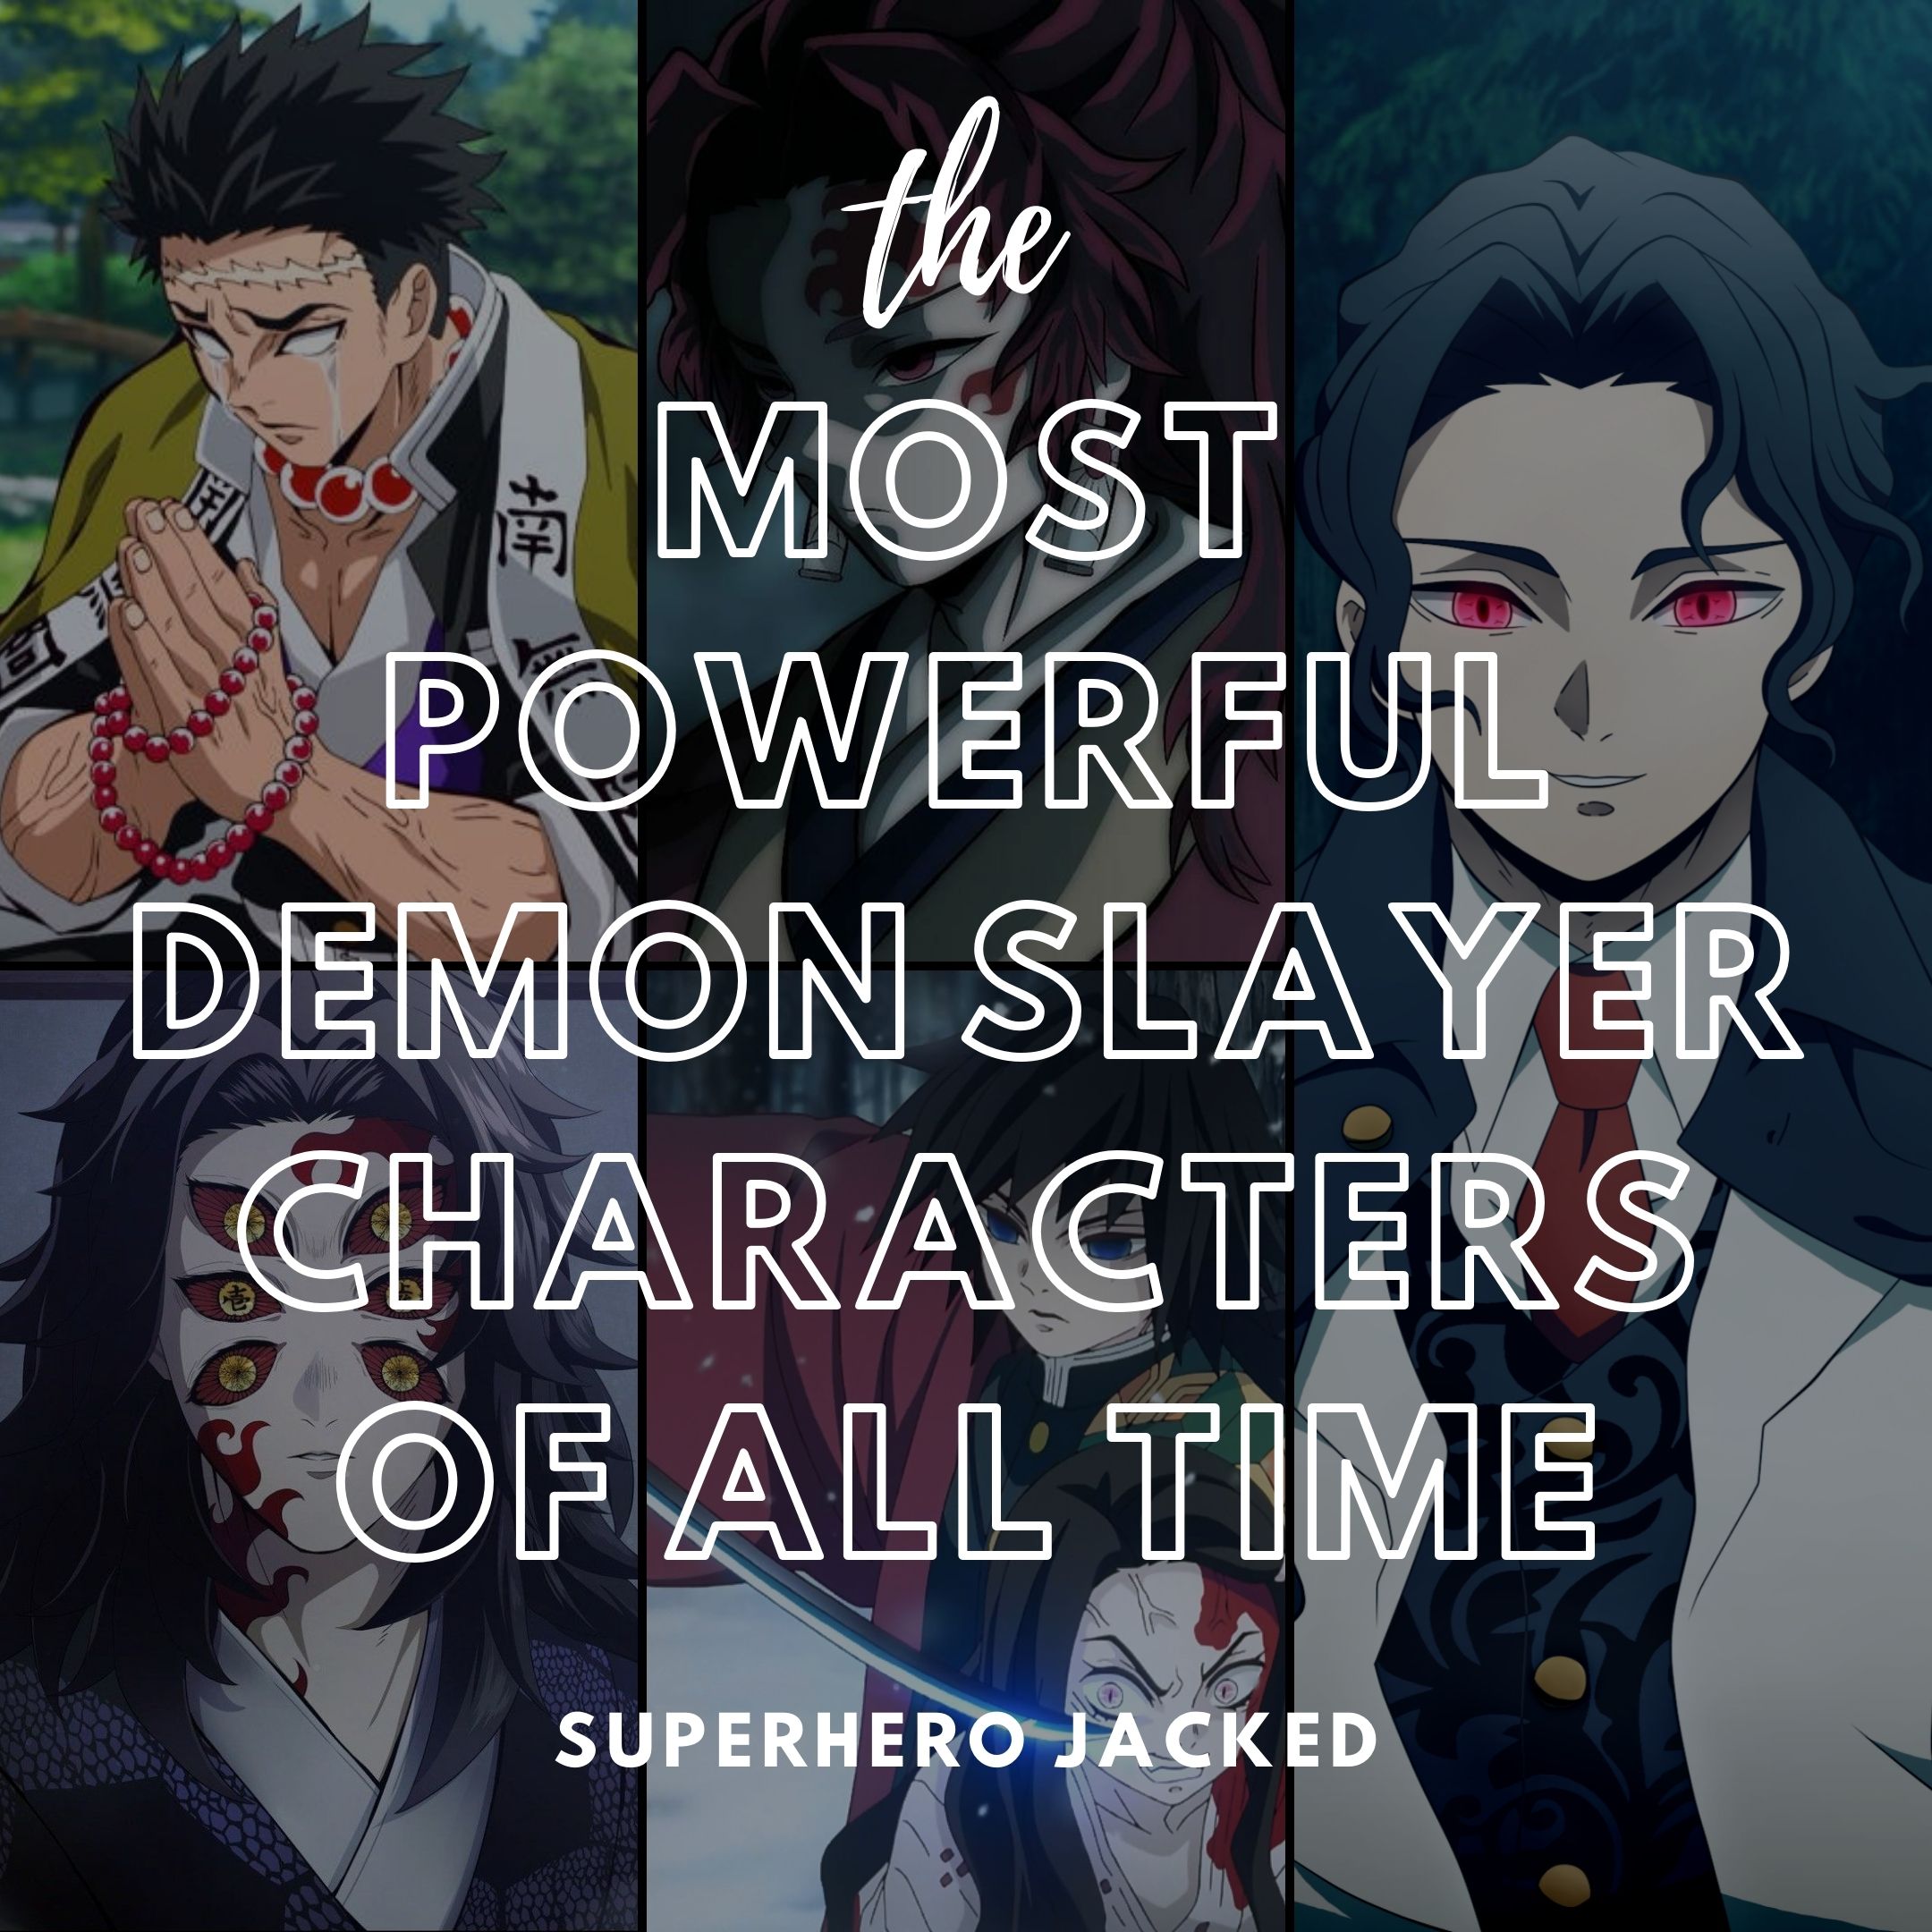 Which Demon Slayer Character Are You? Take This Quiz to Find Out